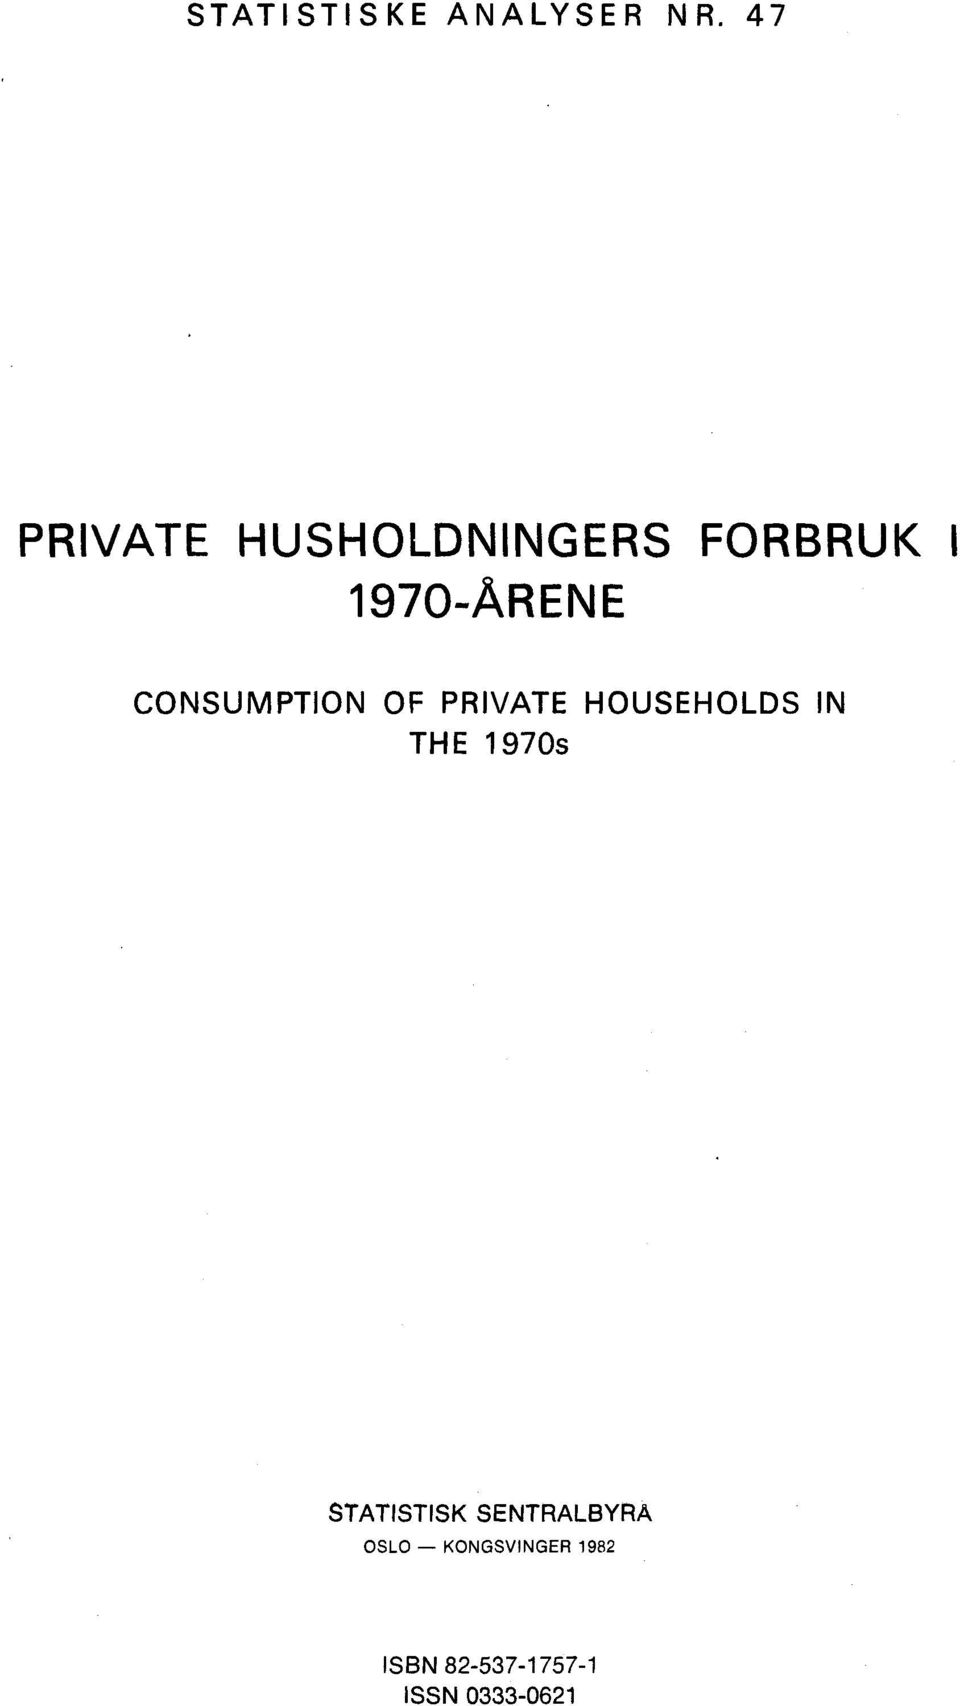 CONSUMPTION OF PRIVATE HOUSEHOLDS IN THE 1970s